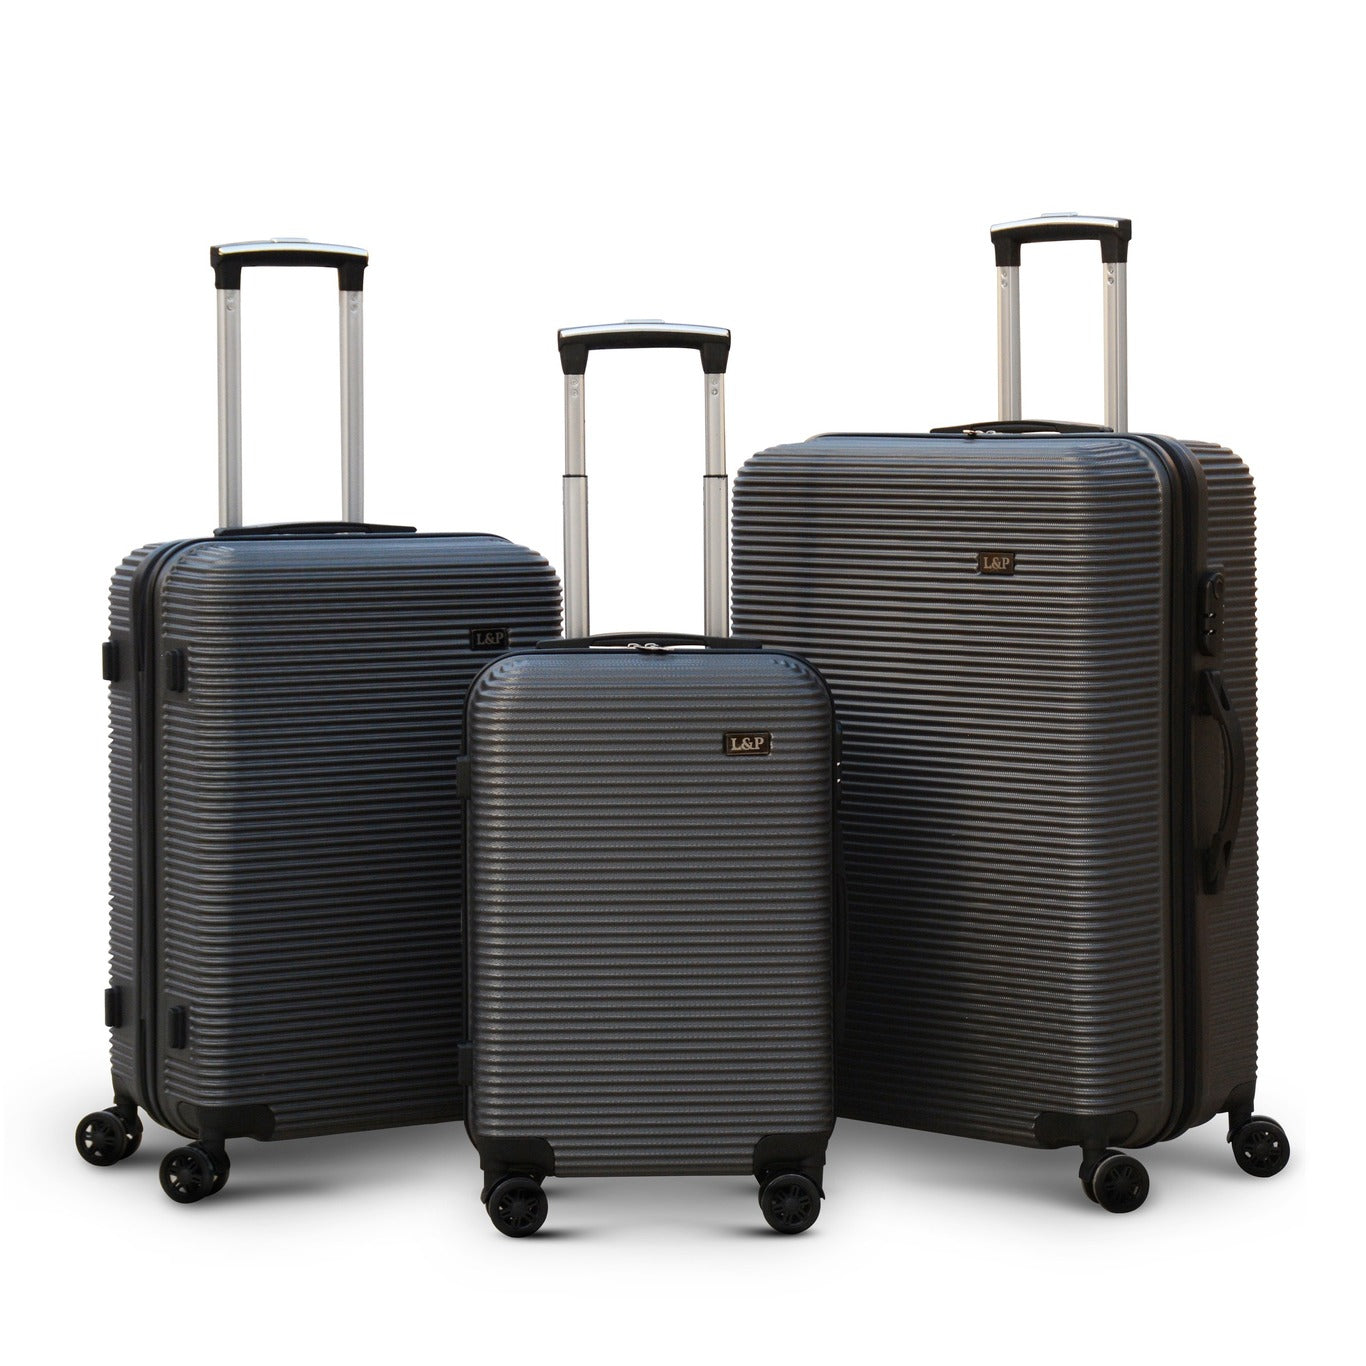 3 Piece Full Set 20" 24" 28 Inches Dark Grey Colour JIAN ABS Line Luggage Lightweight Hard Case Trolley Bag with Spinner Wheel